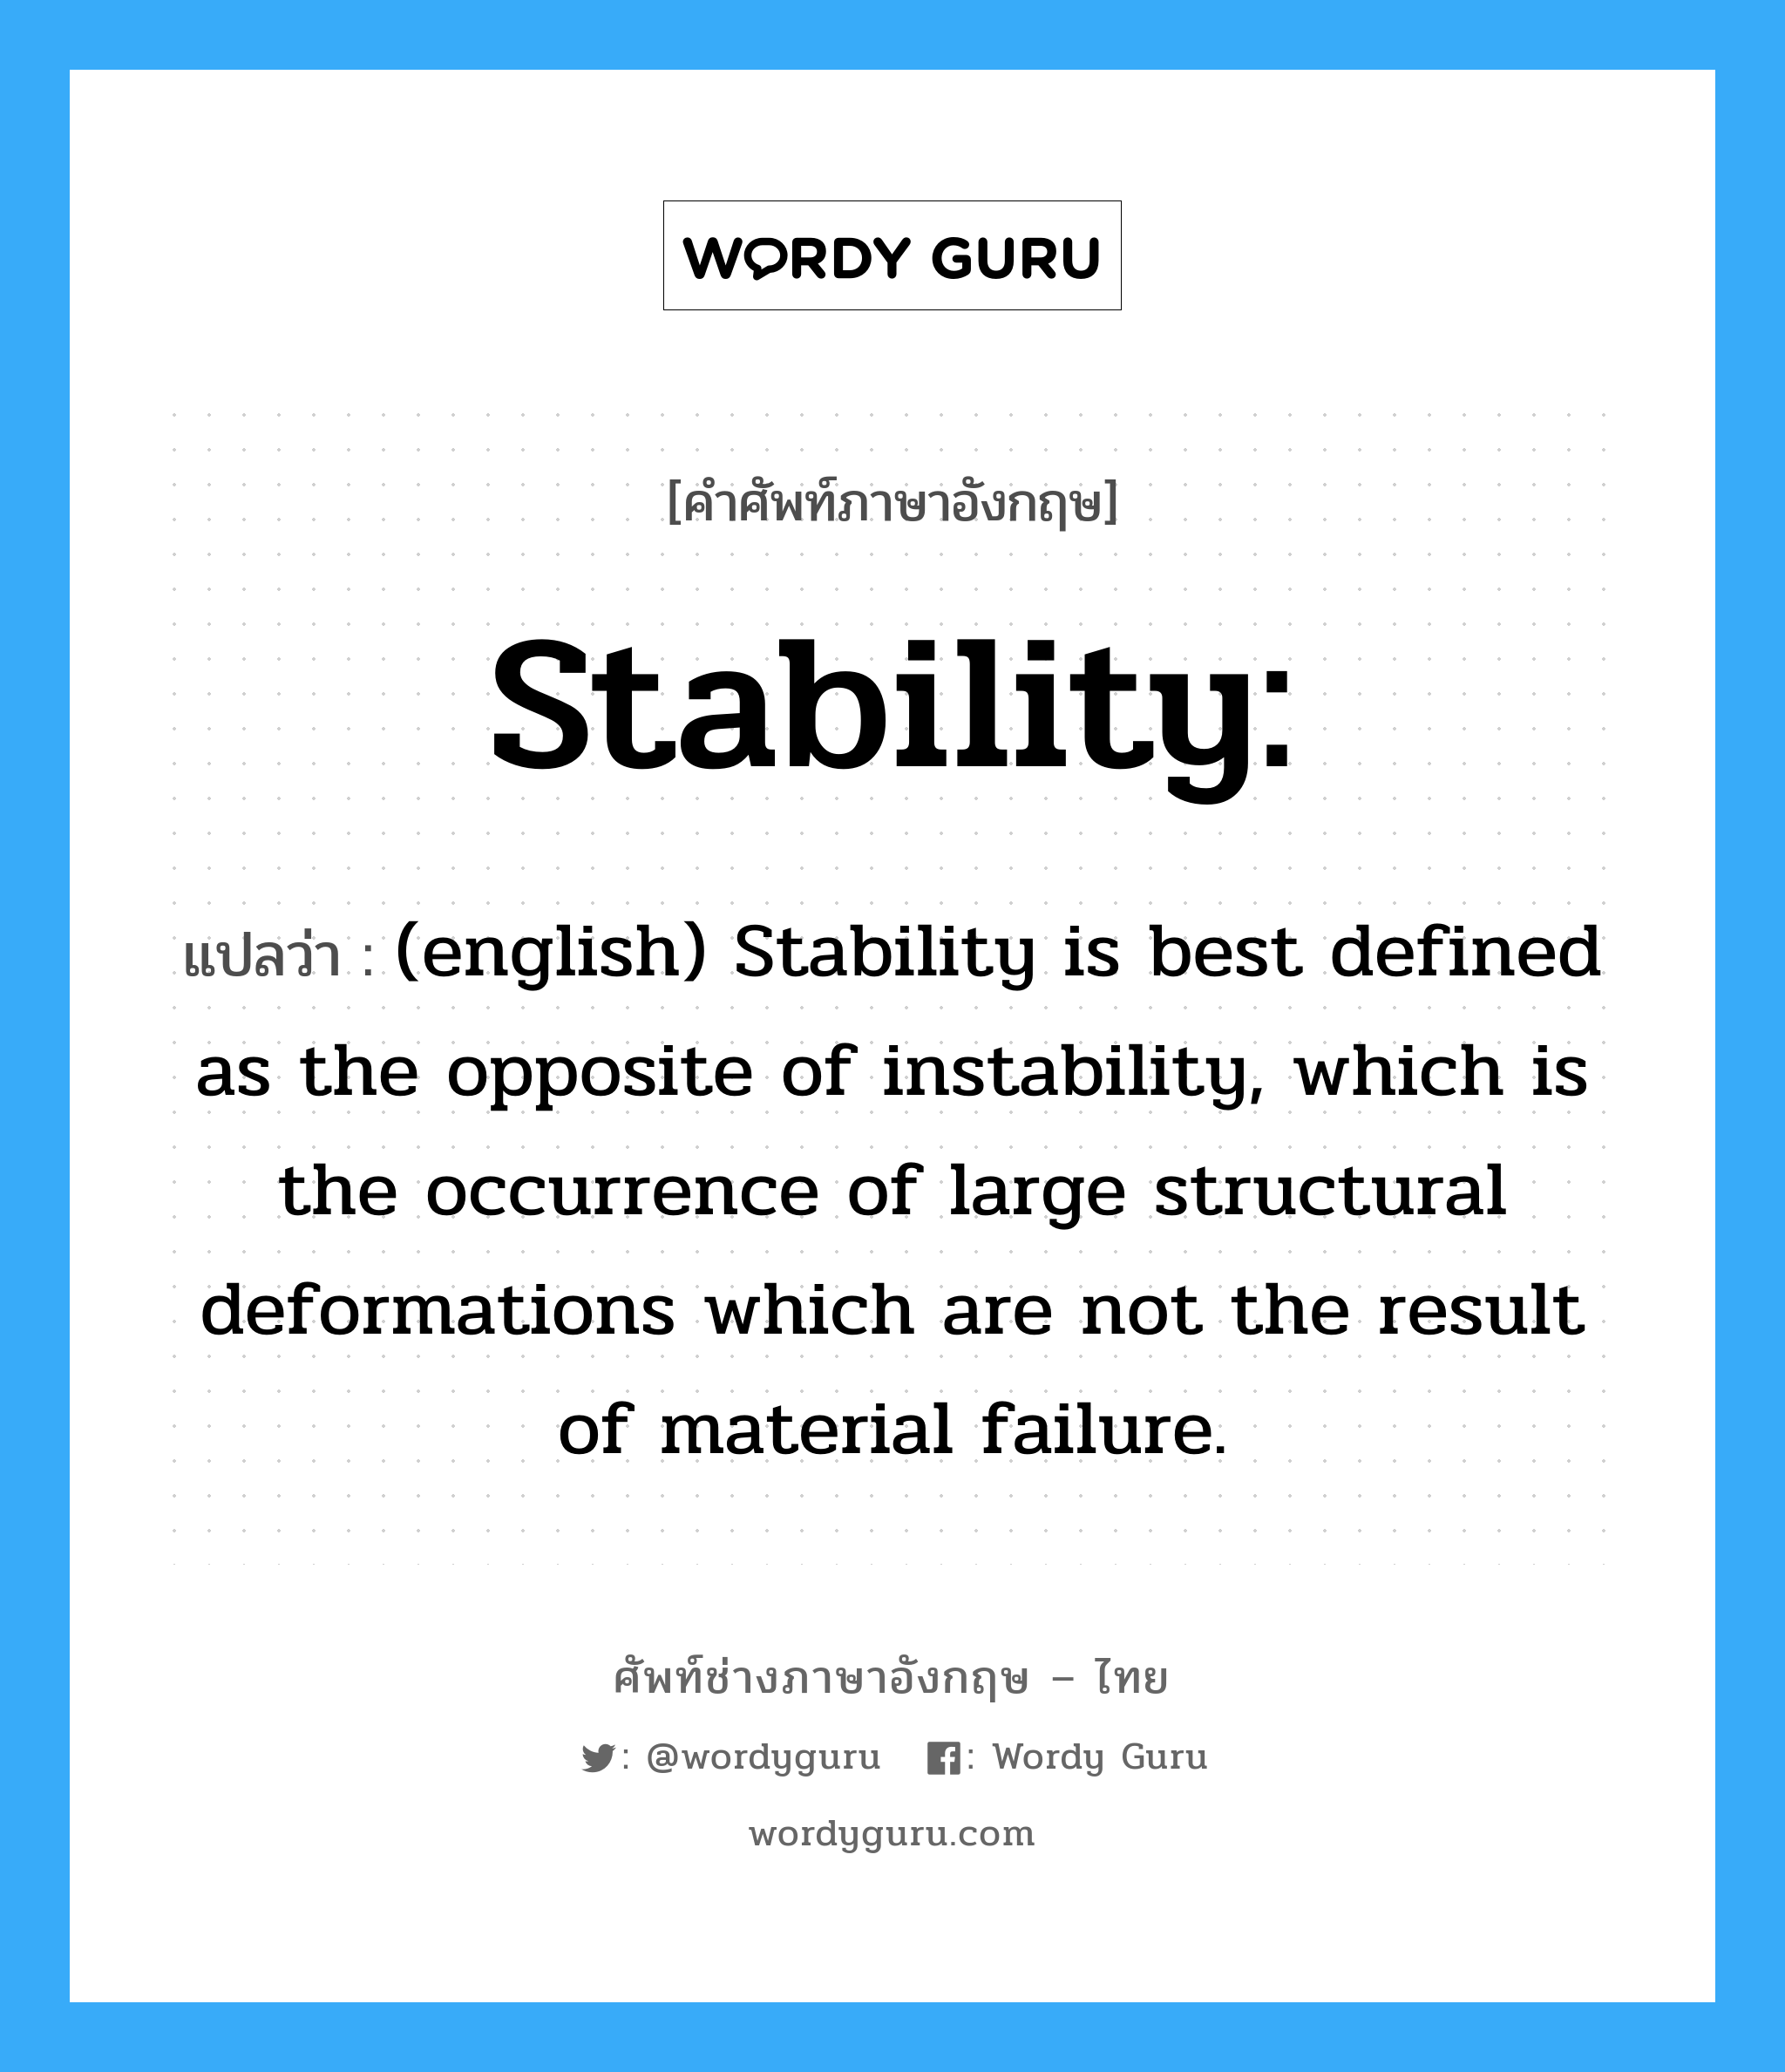 (english) Stability is best defined as the opposite of instability, which is the occurrence of large structural deformations which are not the result of material failure. ภาษาอังกฤษ?, คำศัพท์ช่างภาษาอังกฤษ - ไทย (english) Stability is best defined as the opposite of instability, which is the occurrence of large structural deformations which are not the result of material failure. คำศัพท์ภาษาอังกฤษ (english) Stability is best defined as the opposite of instability, which is the occurrence of large structural deformations which are not the result of material failure. แปลว่า Stability: